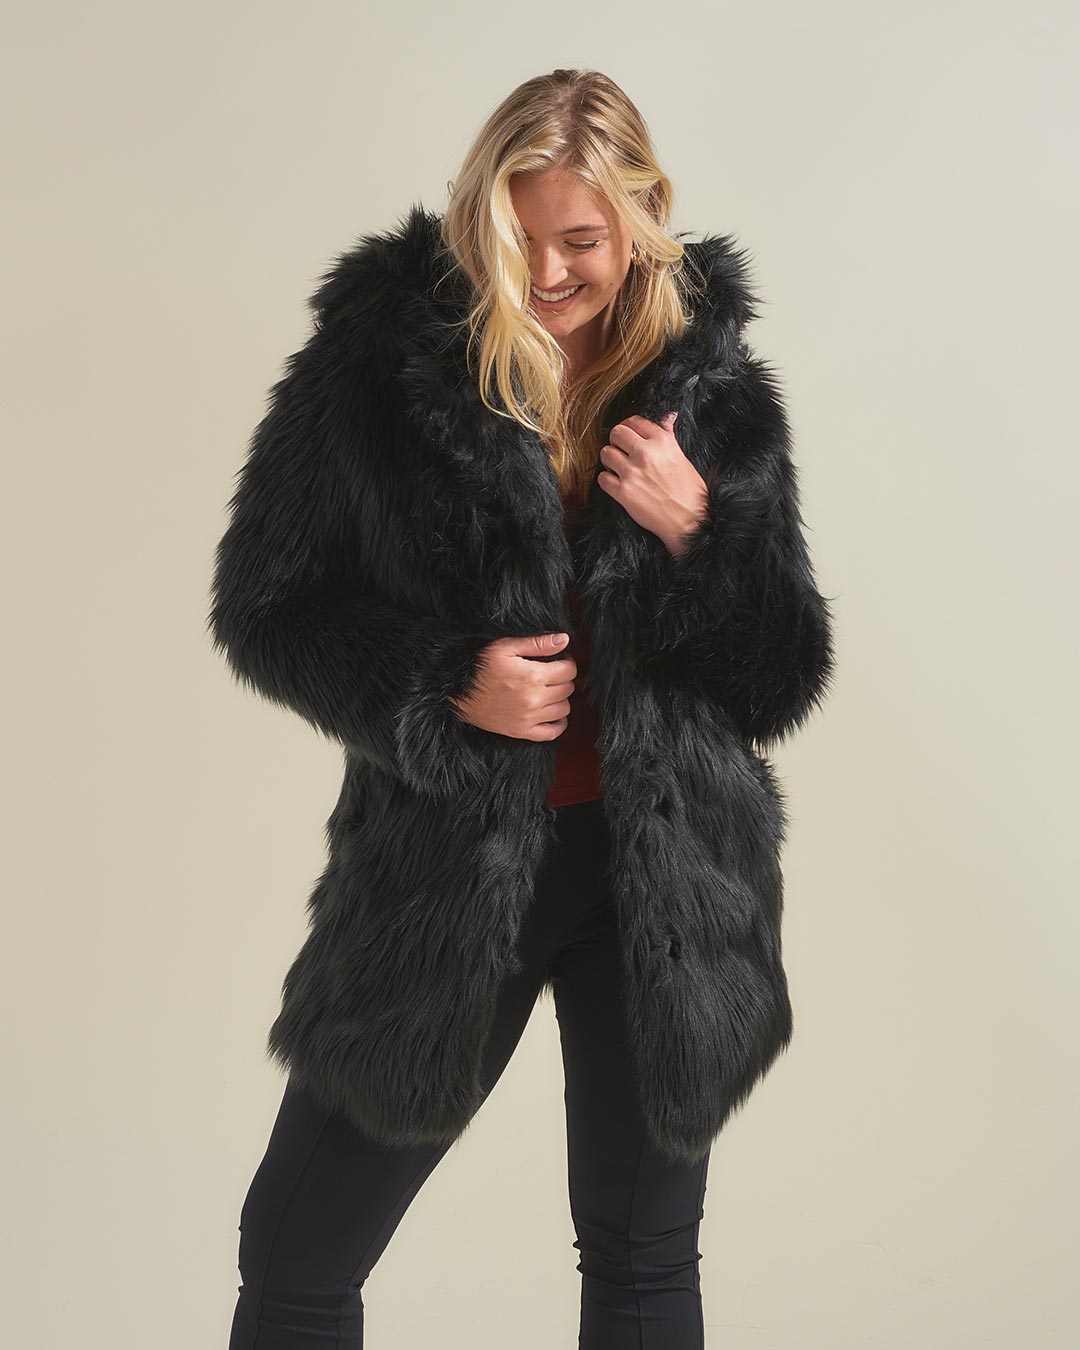 Woman With Blonde Hair Looking Down and Wearing Black Wolf Faux Fur Coat Without Hood